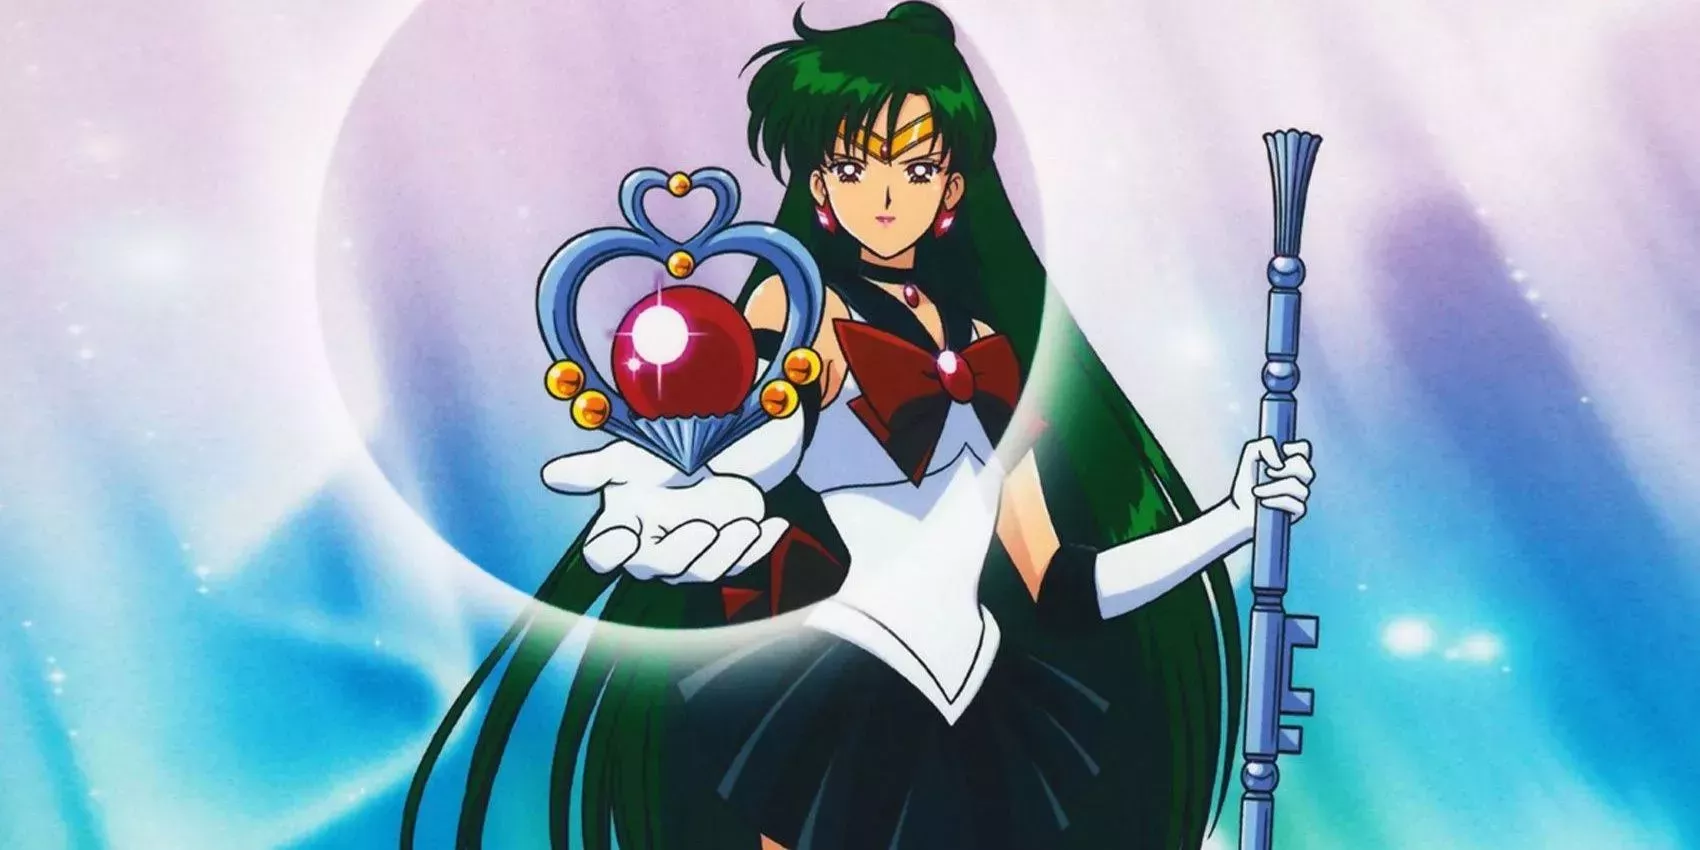 Sailor Pluto uses her powers in Sailor Moon